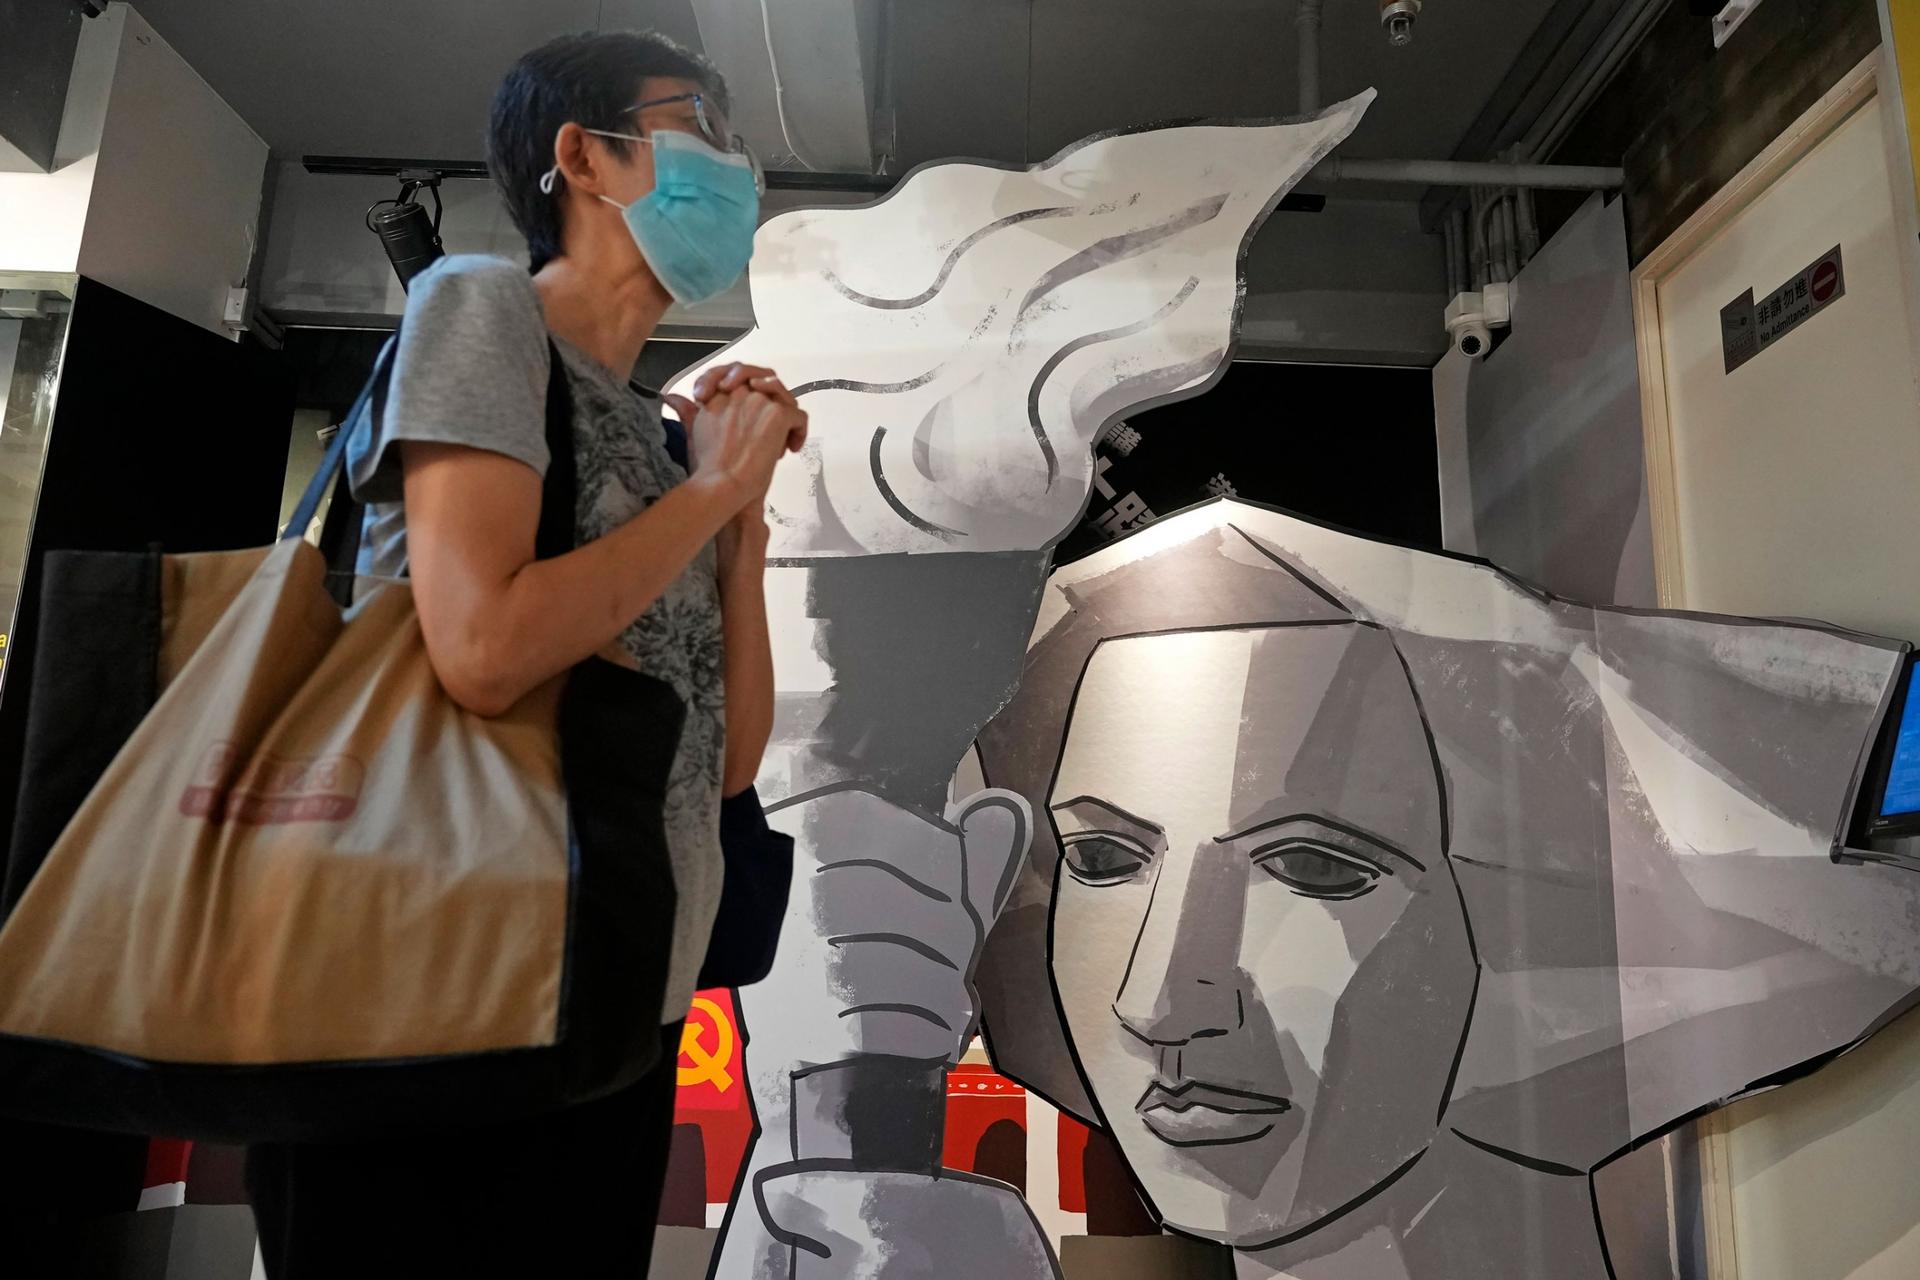 A person is shown with a bag over their shoulder and standing next to an silver artwork of a woman holding a torch with flame.